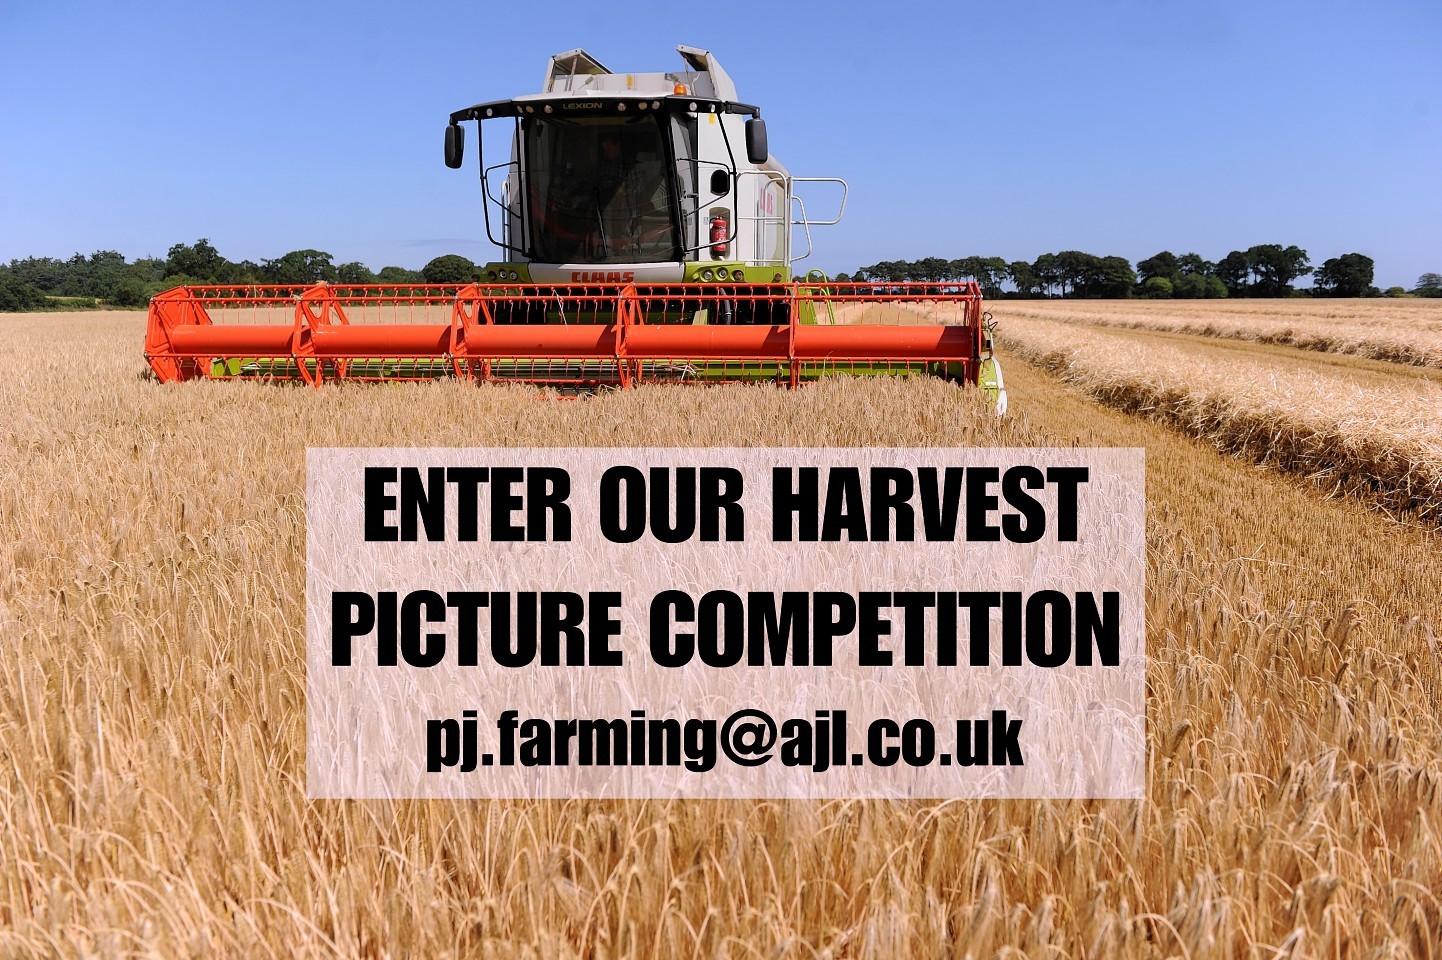 Send us in your harvest pictures